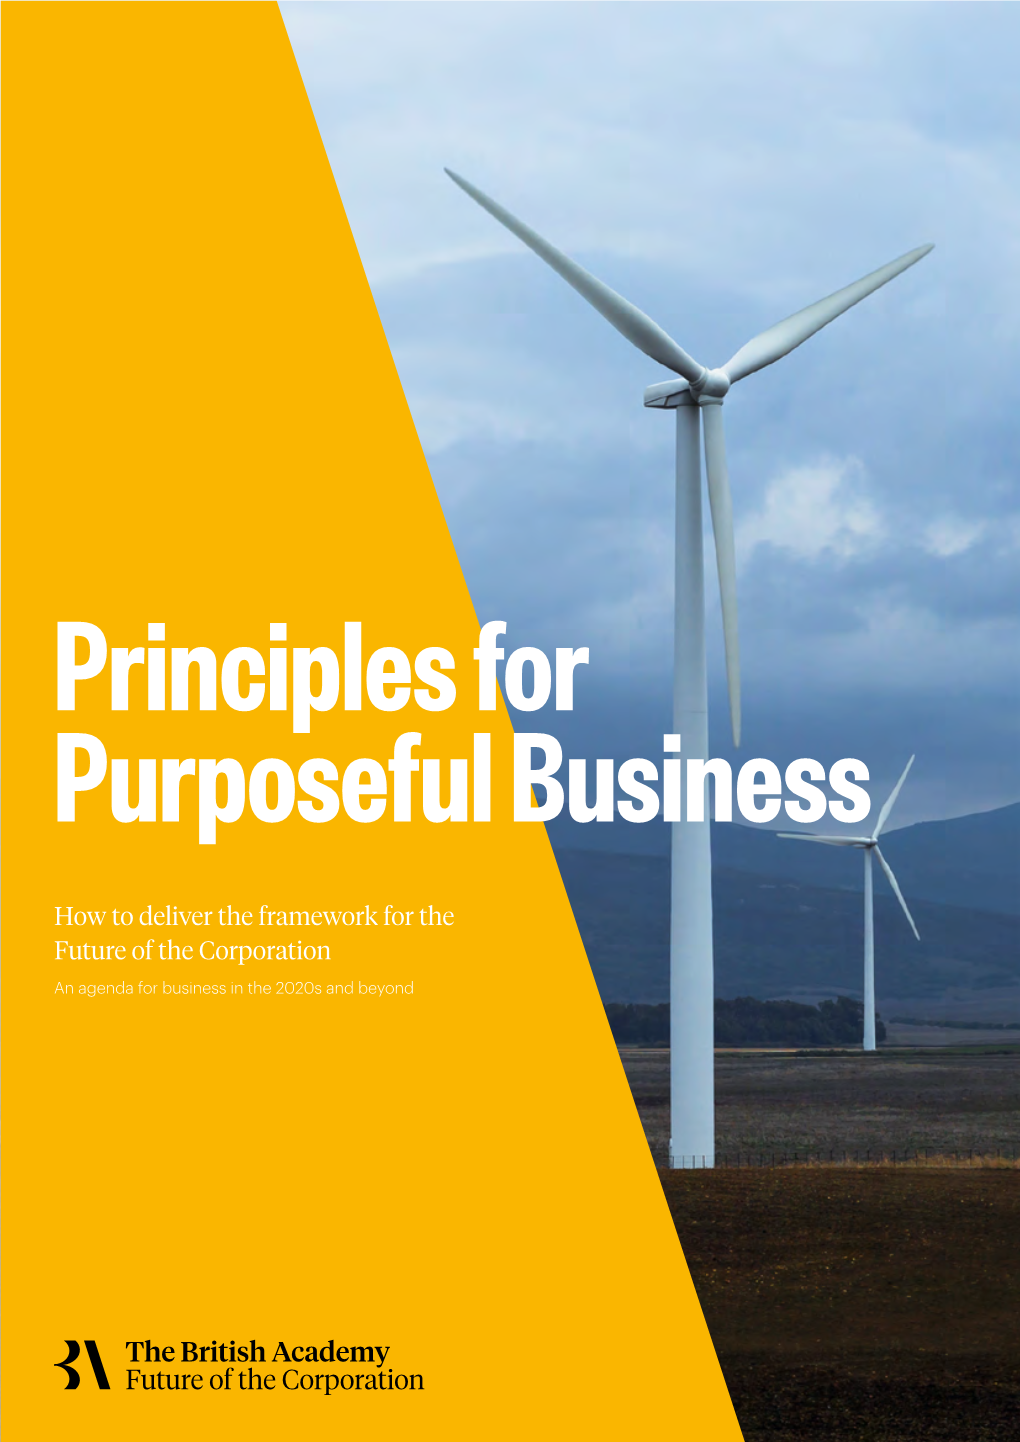 How to Deliver the Framework for the Future of the Corporation an Agenda for Business in the 2020S and Beyond